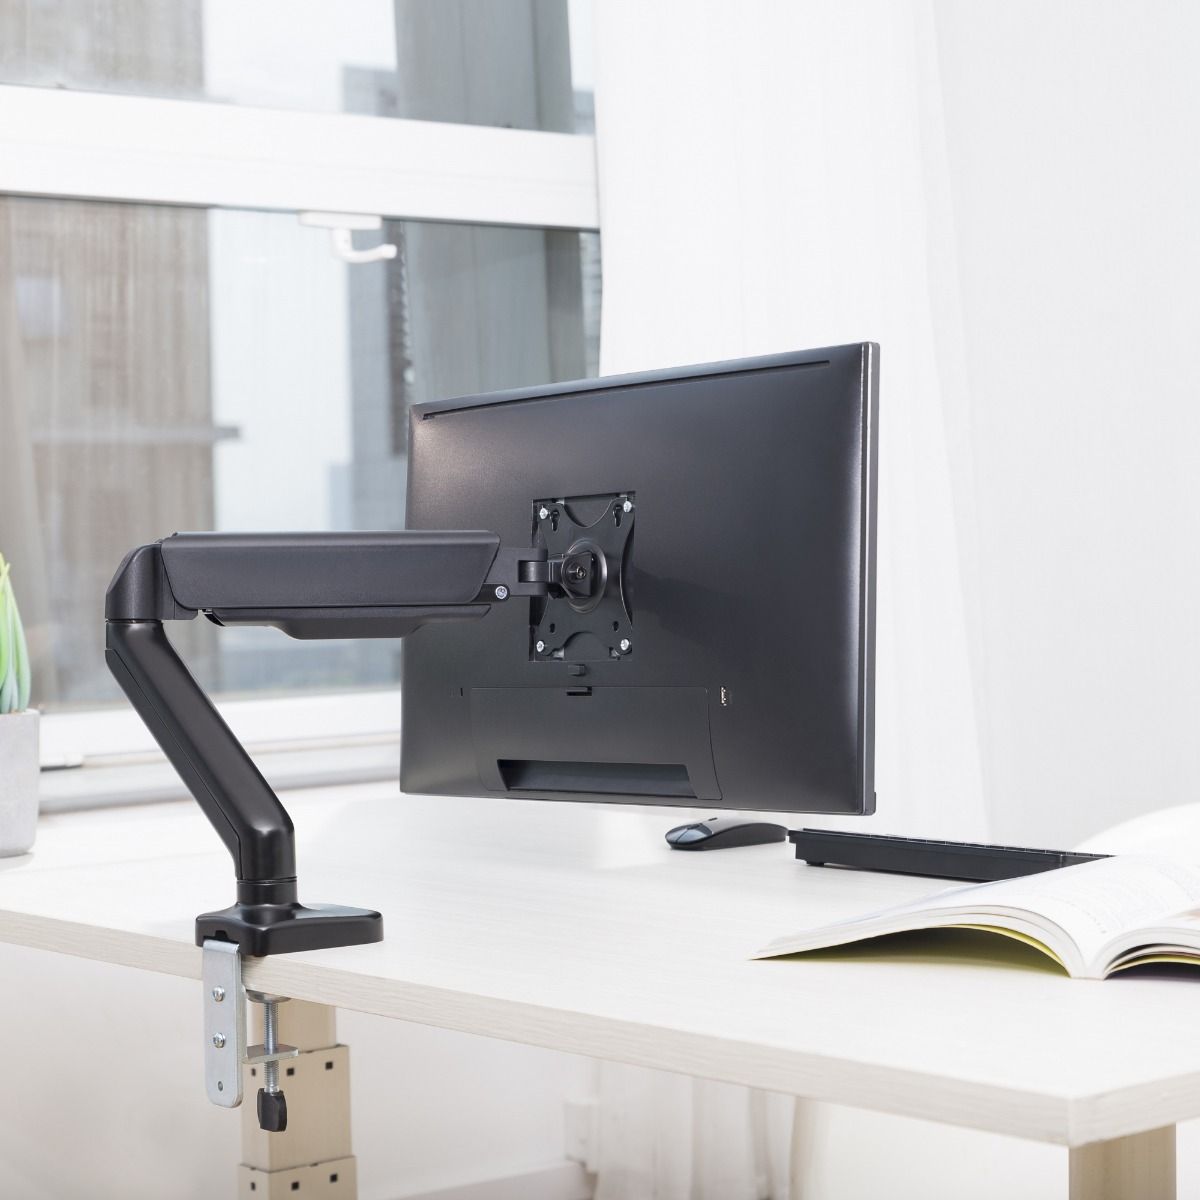 FlexiLift: Premium Single Monitor Arm with ErgoLife Steel and Gas Spring